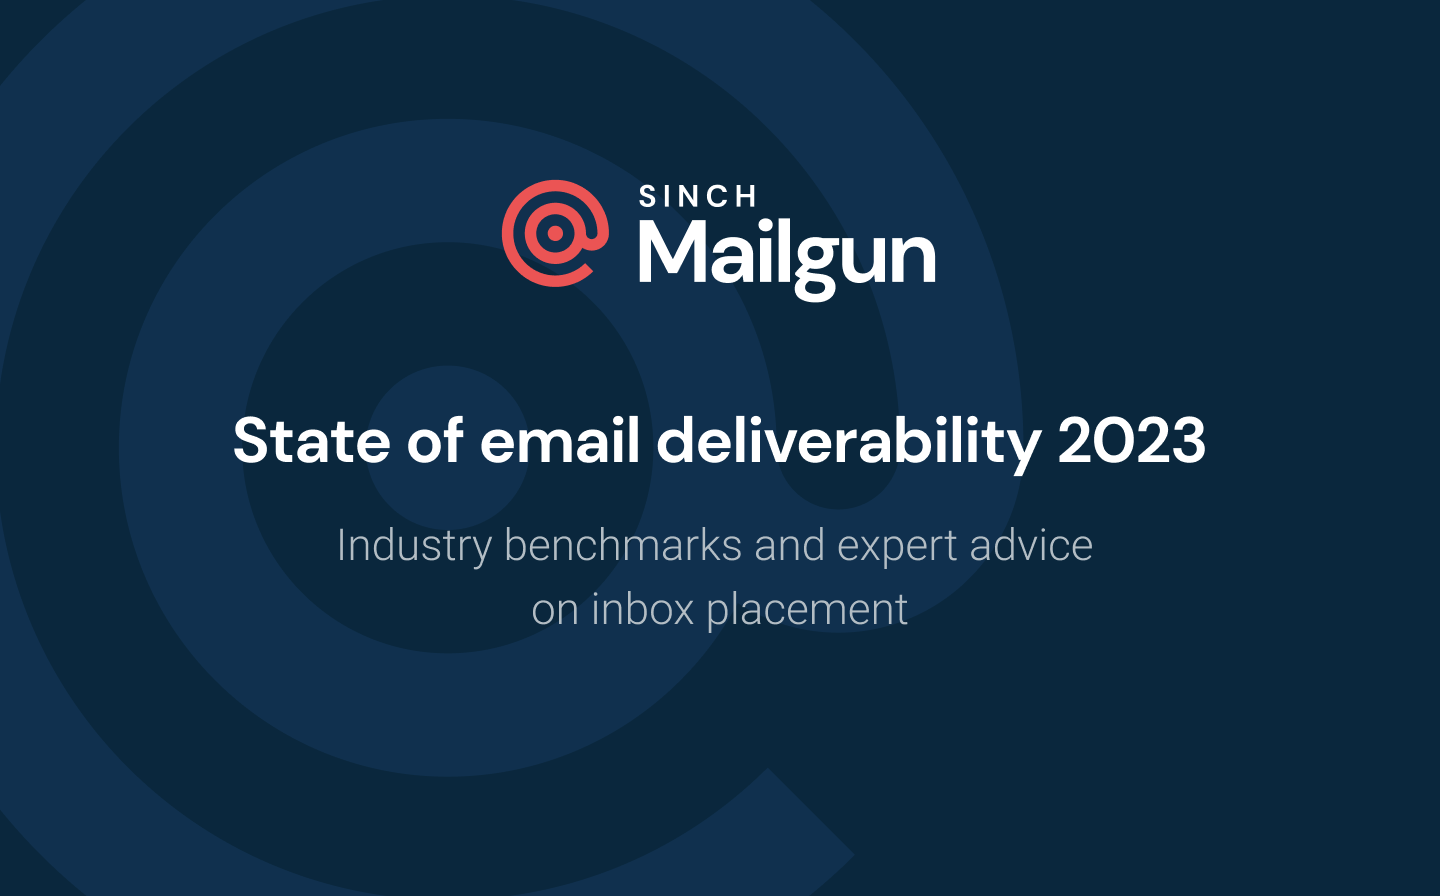 The state of email deliverability 2023 title card